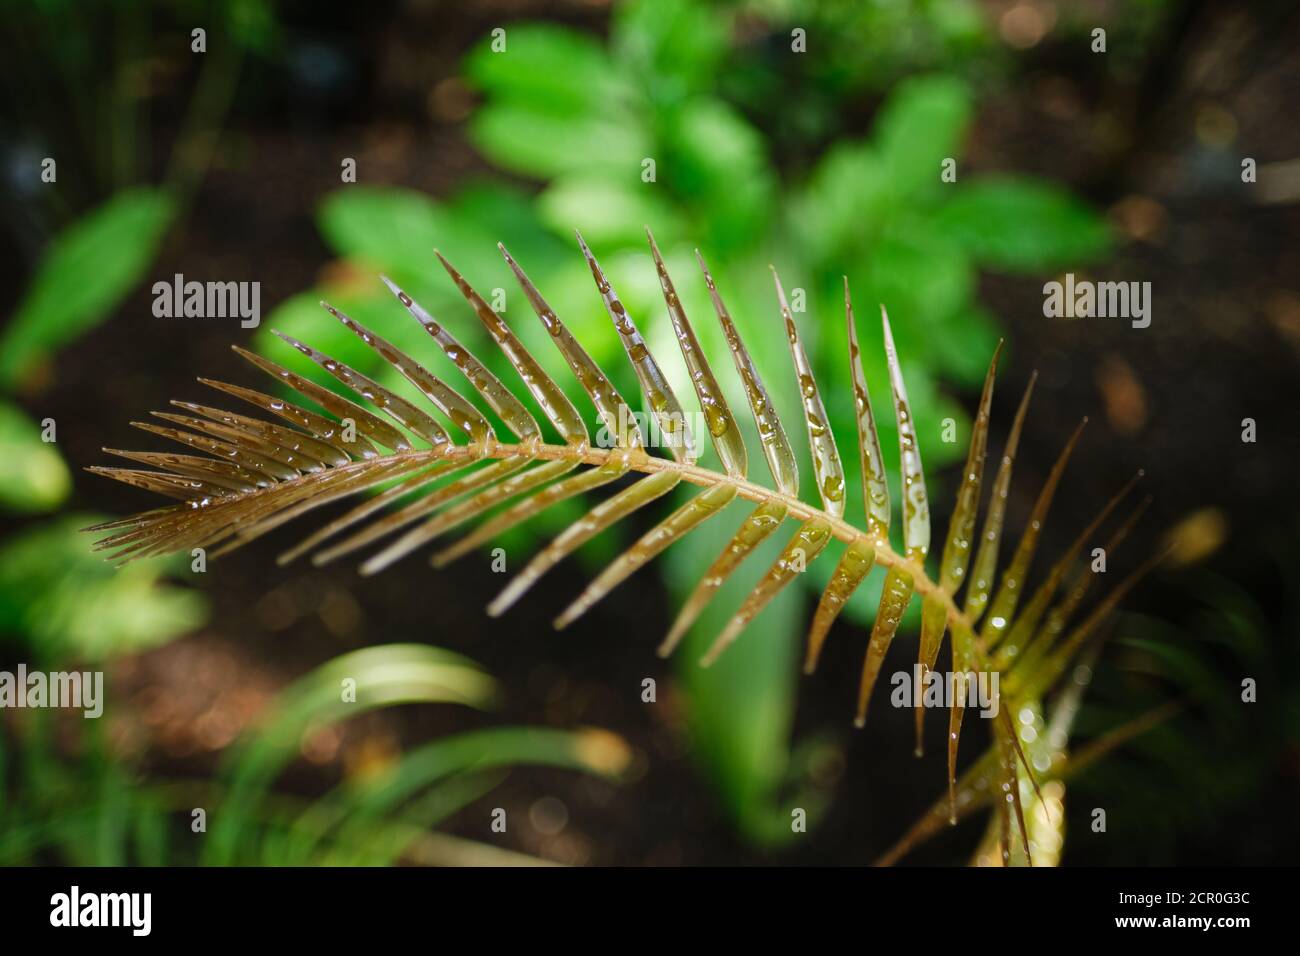 Close-up of Ceratozamia, genus of New World cycads in the family Zamiaceae. Stock Photo